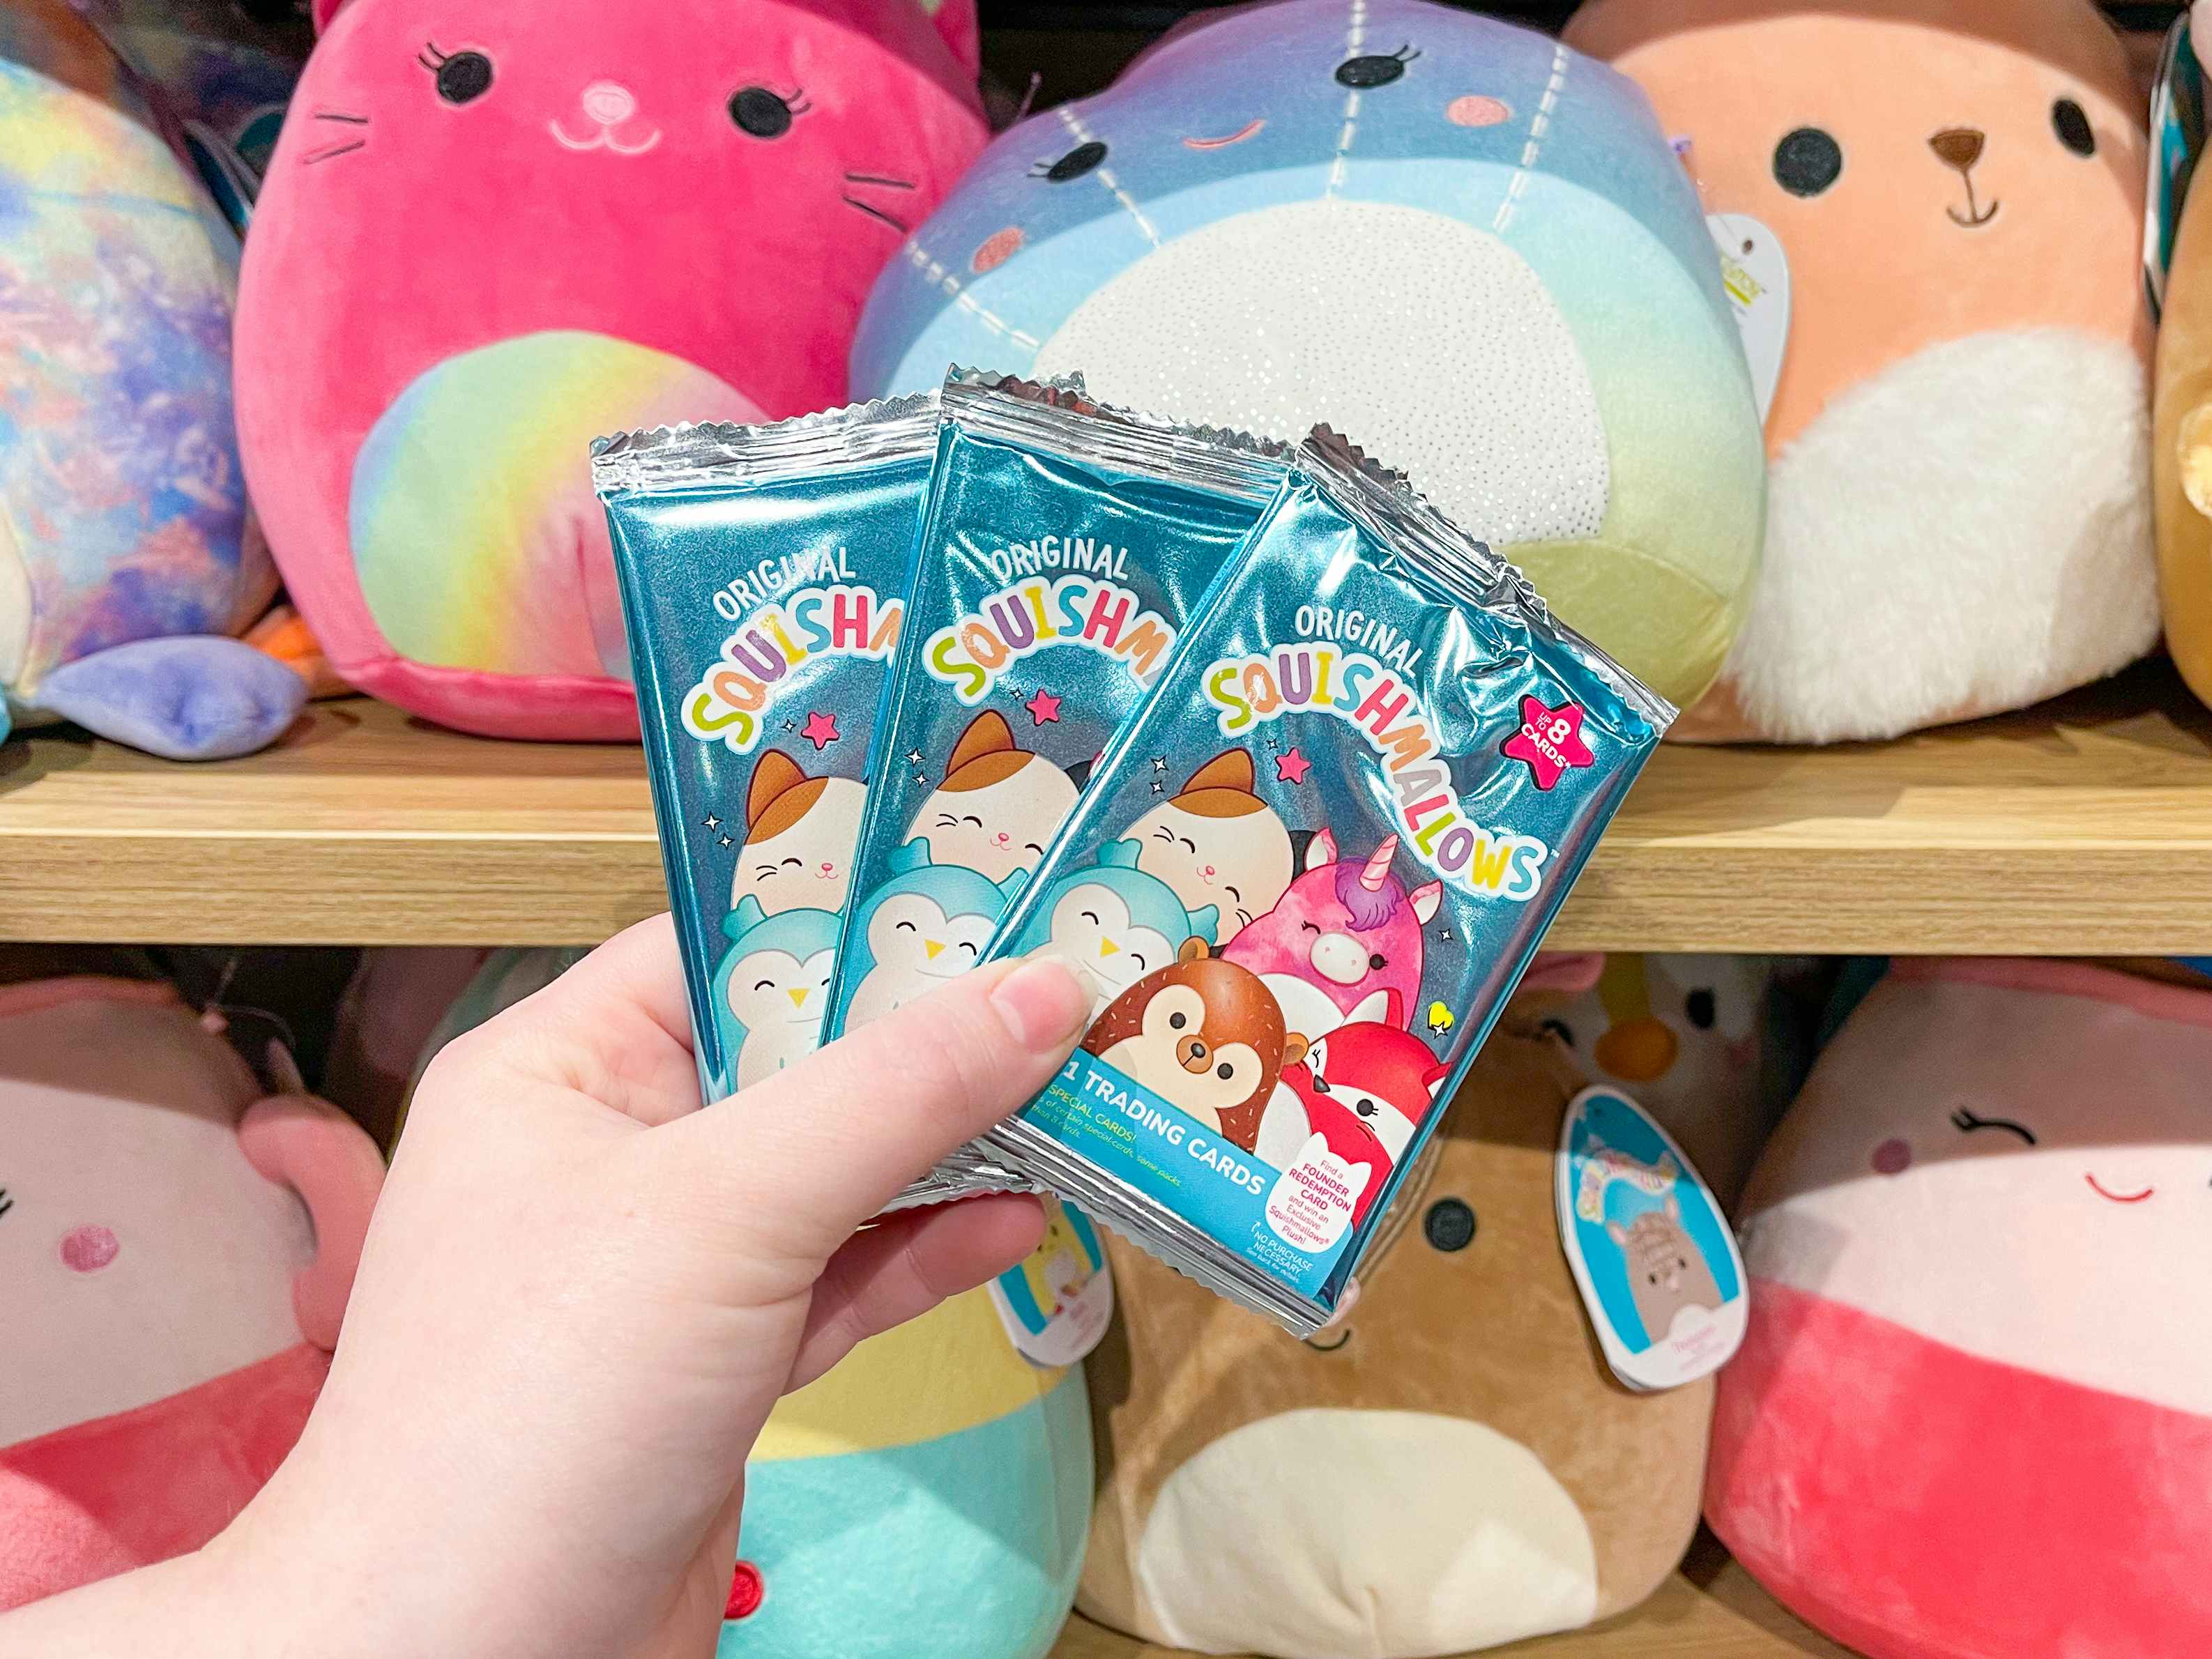 A person's hand holding up some Squishmallows trading card packs